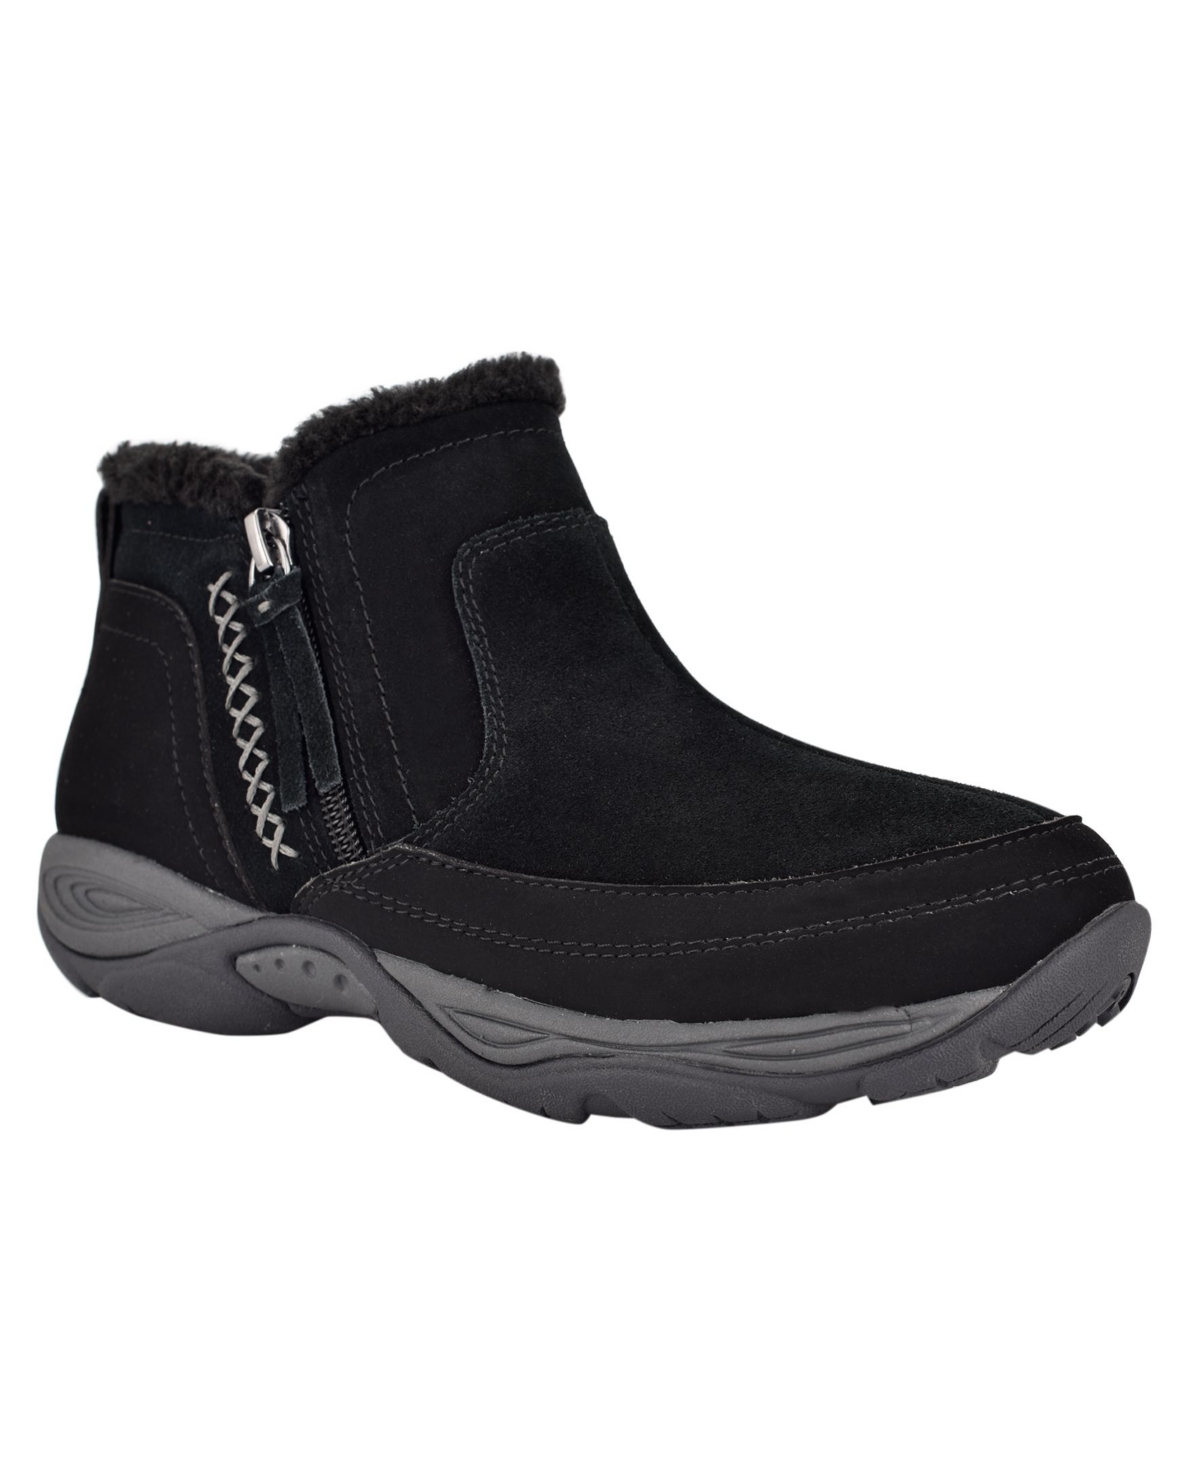 Women's Epic Round Toe Cold Weather Casual Booties - Black